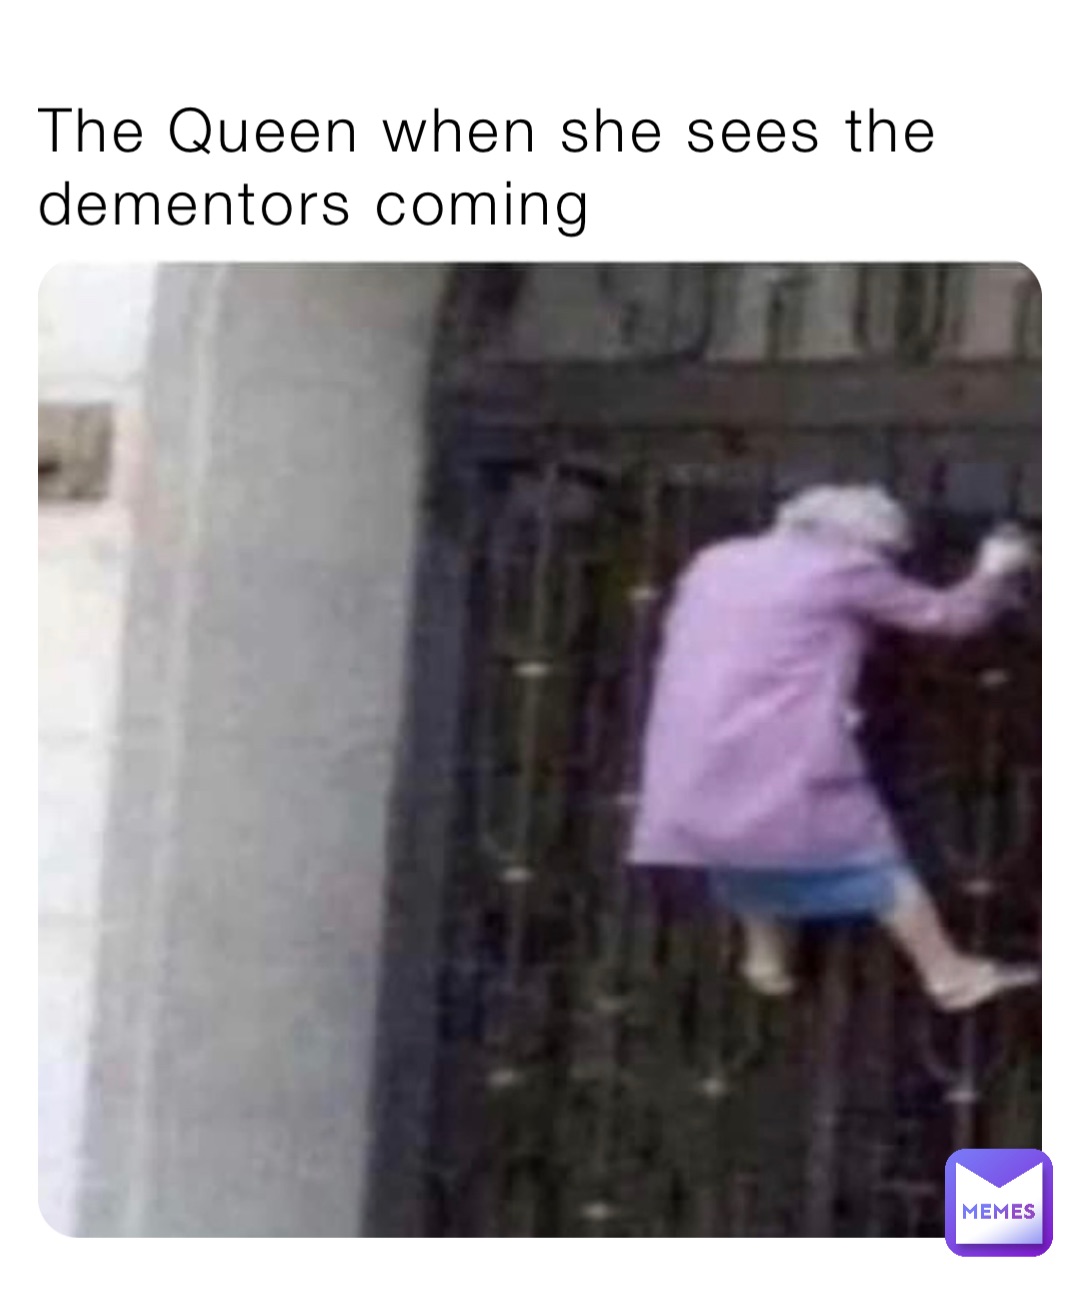 The Queen when she sees the dementors coming